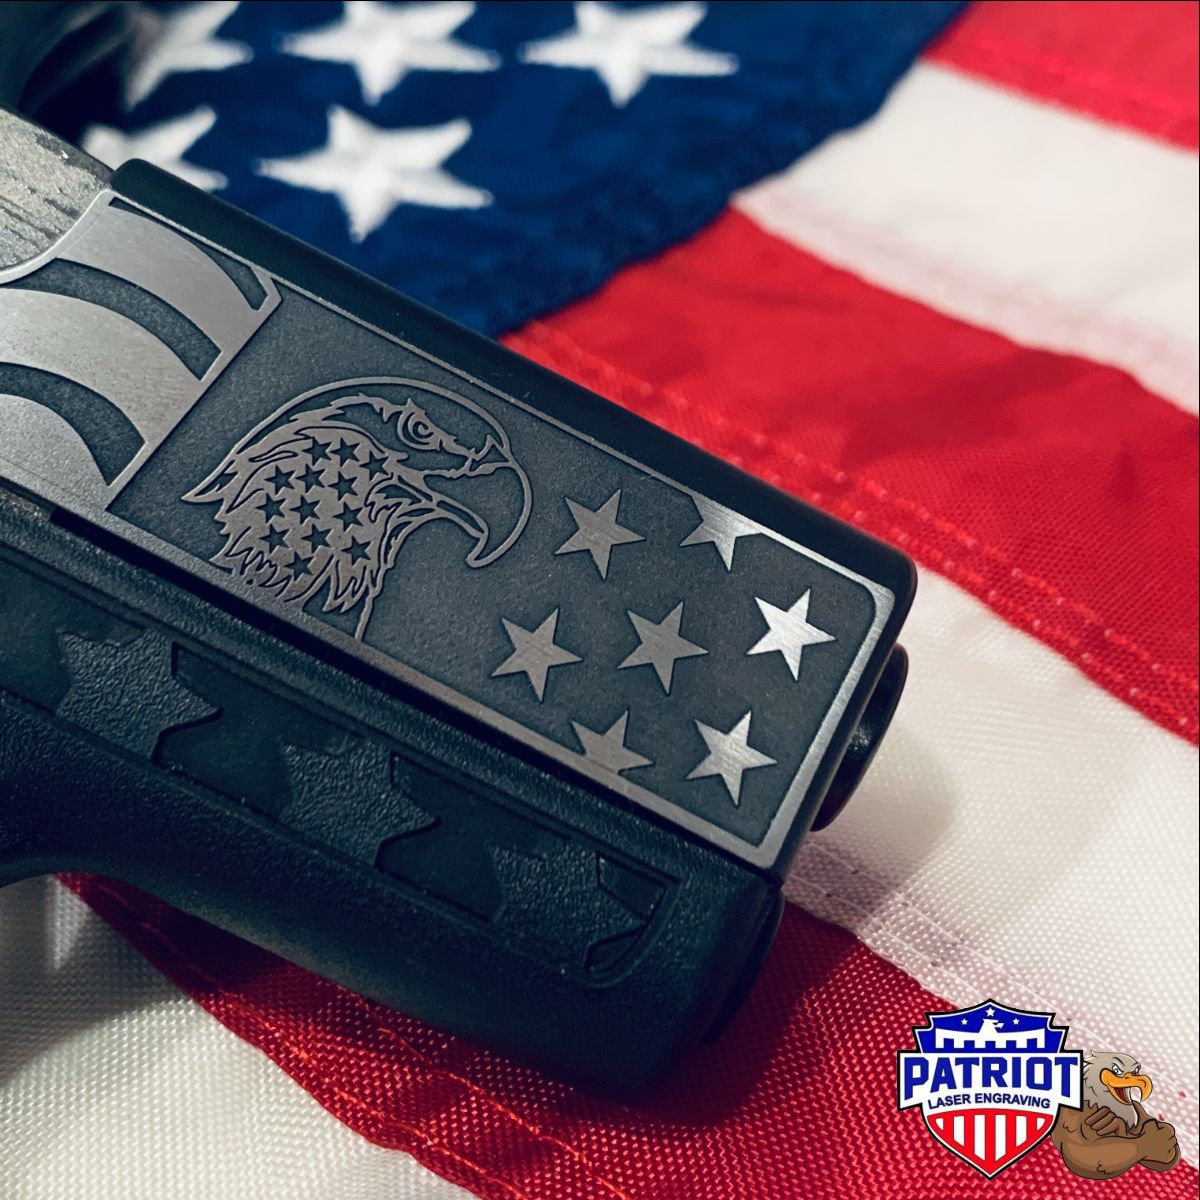 A photo of a deep engraved glock slide with an eagle and stars and stripes shown at an angle with a US Flag in the background.